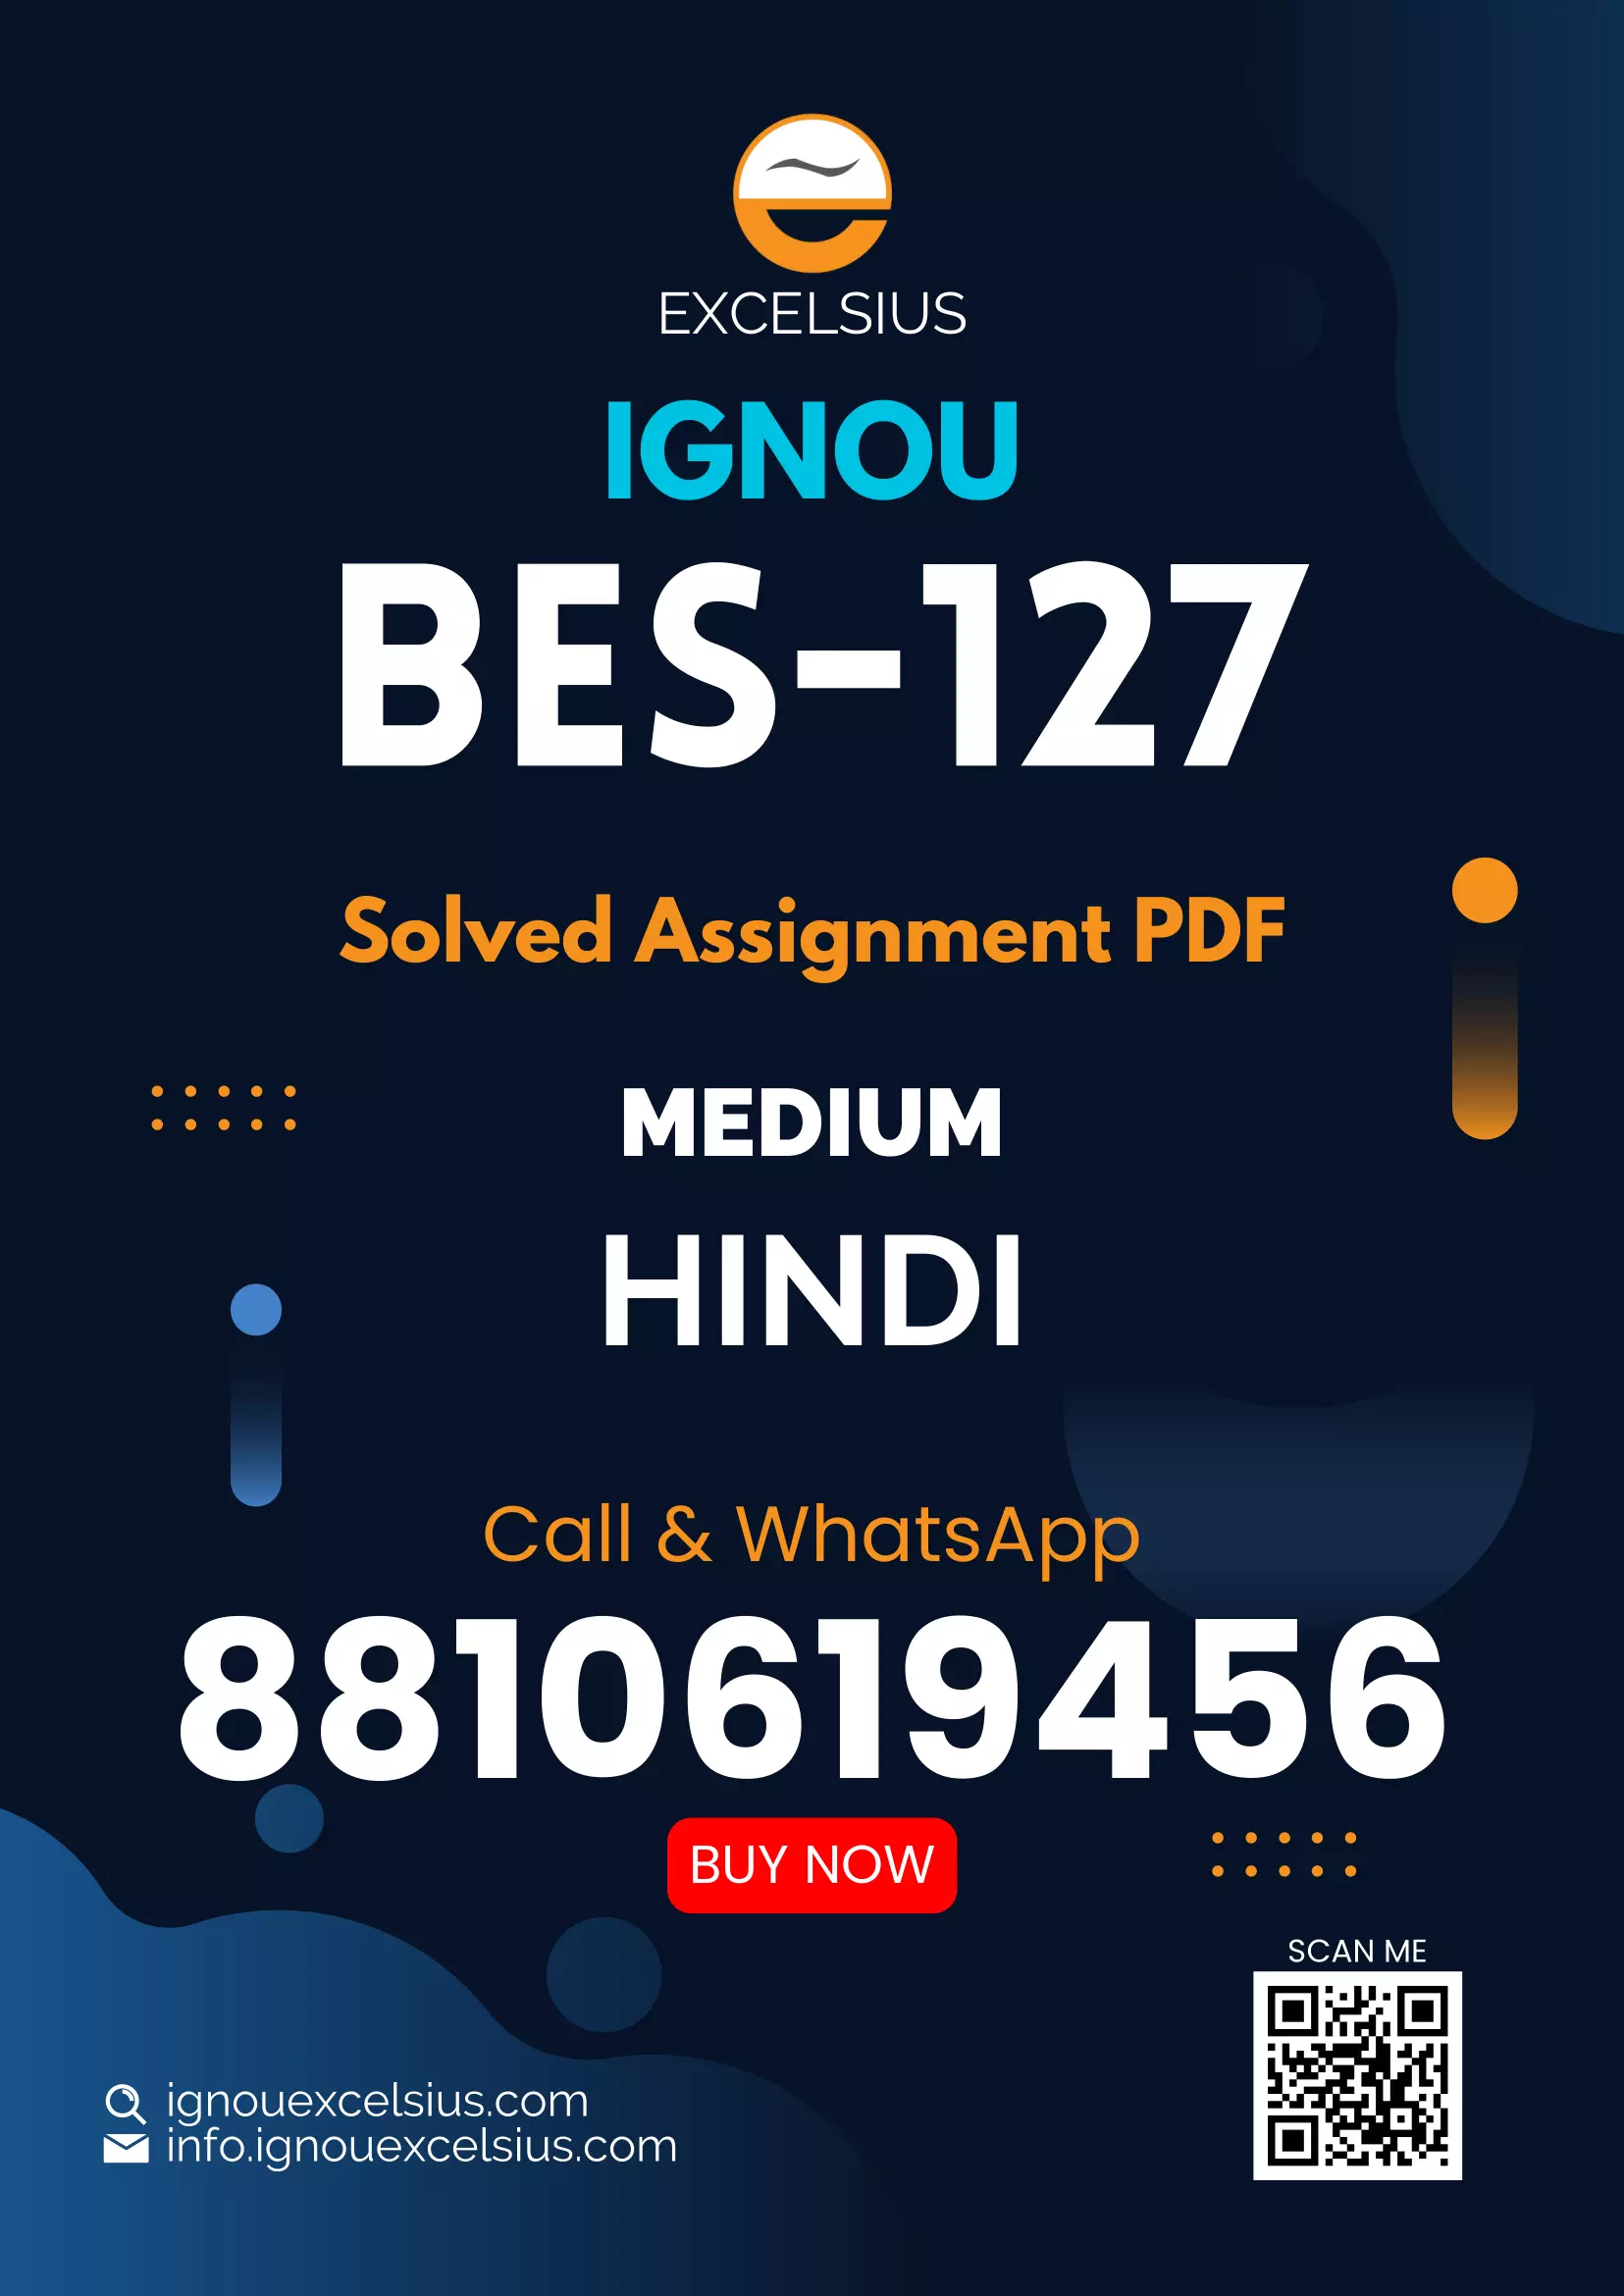 IGNOU BES-127 - Assessment for Learning, Latest Solved Assignment-January 2022